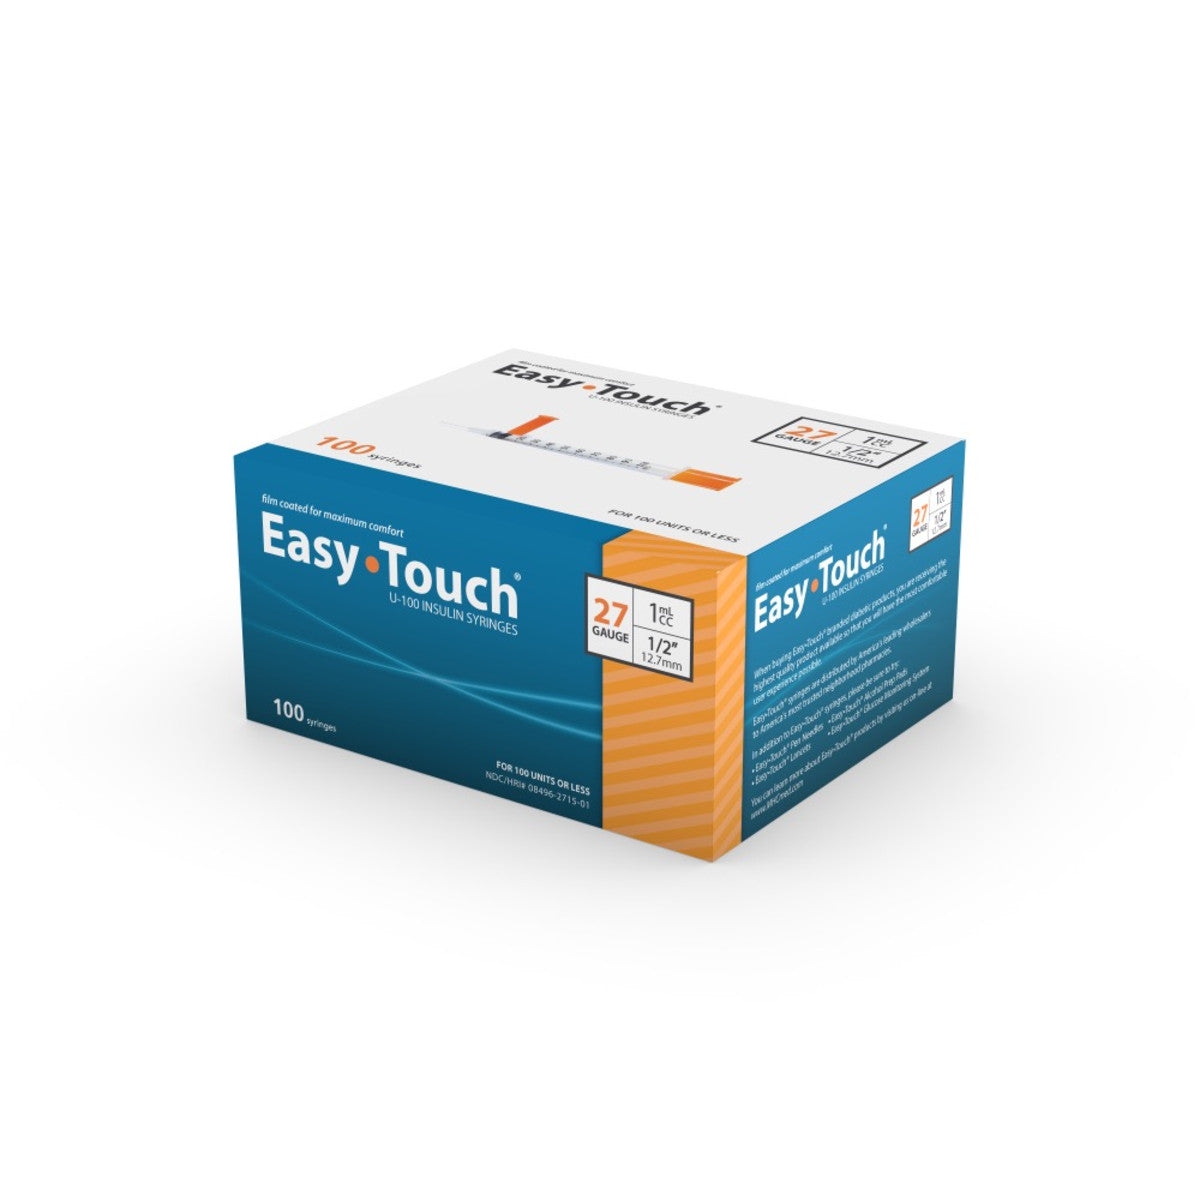 Easy Touch Insulin Syringe, 27G 1cc 1/2-Inch (12.7mm), 827155, Box of 100